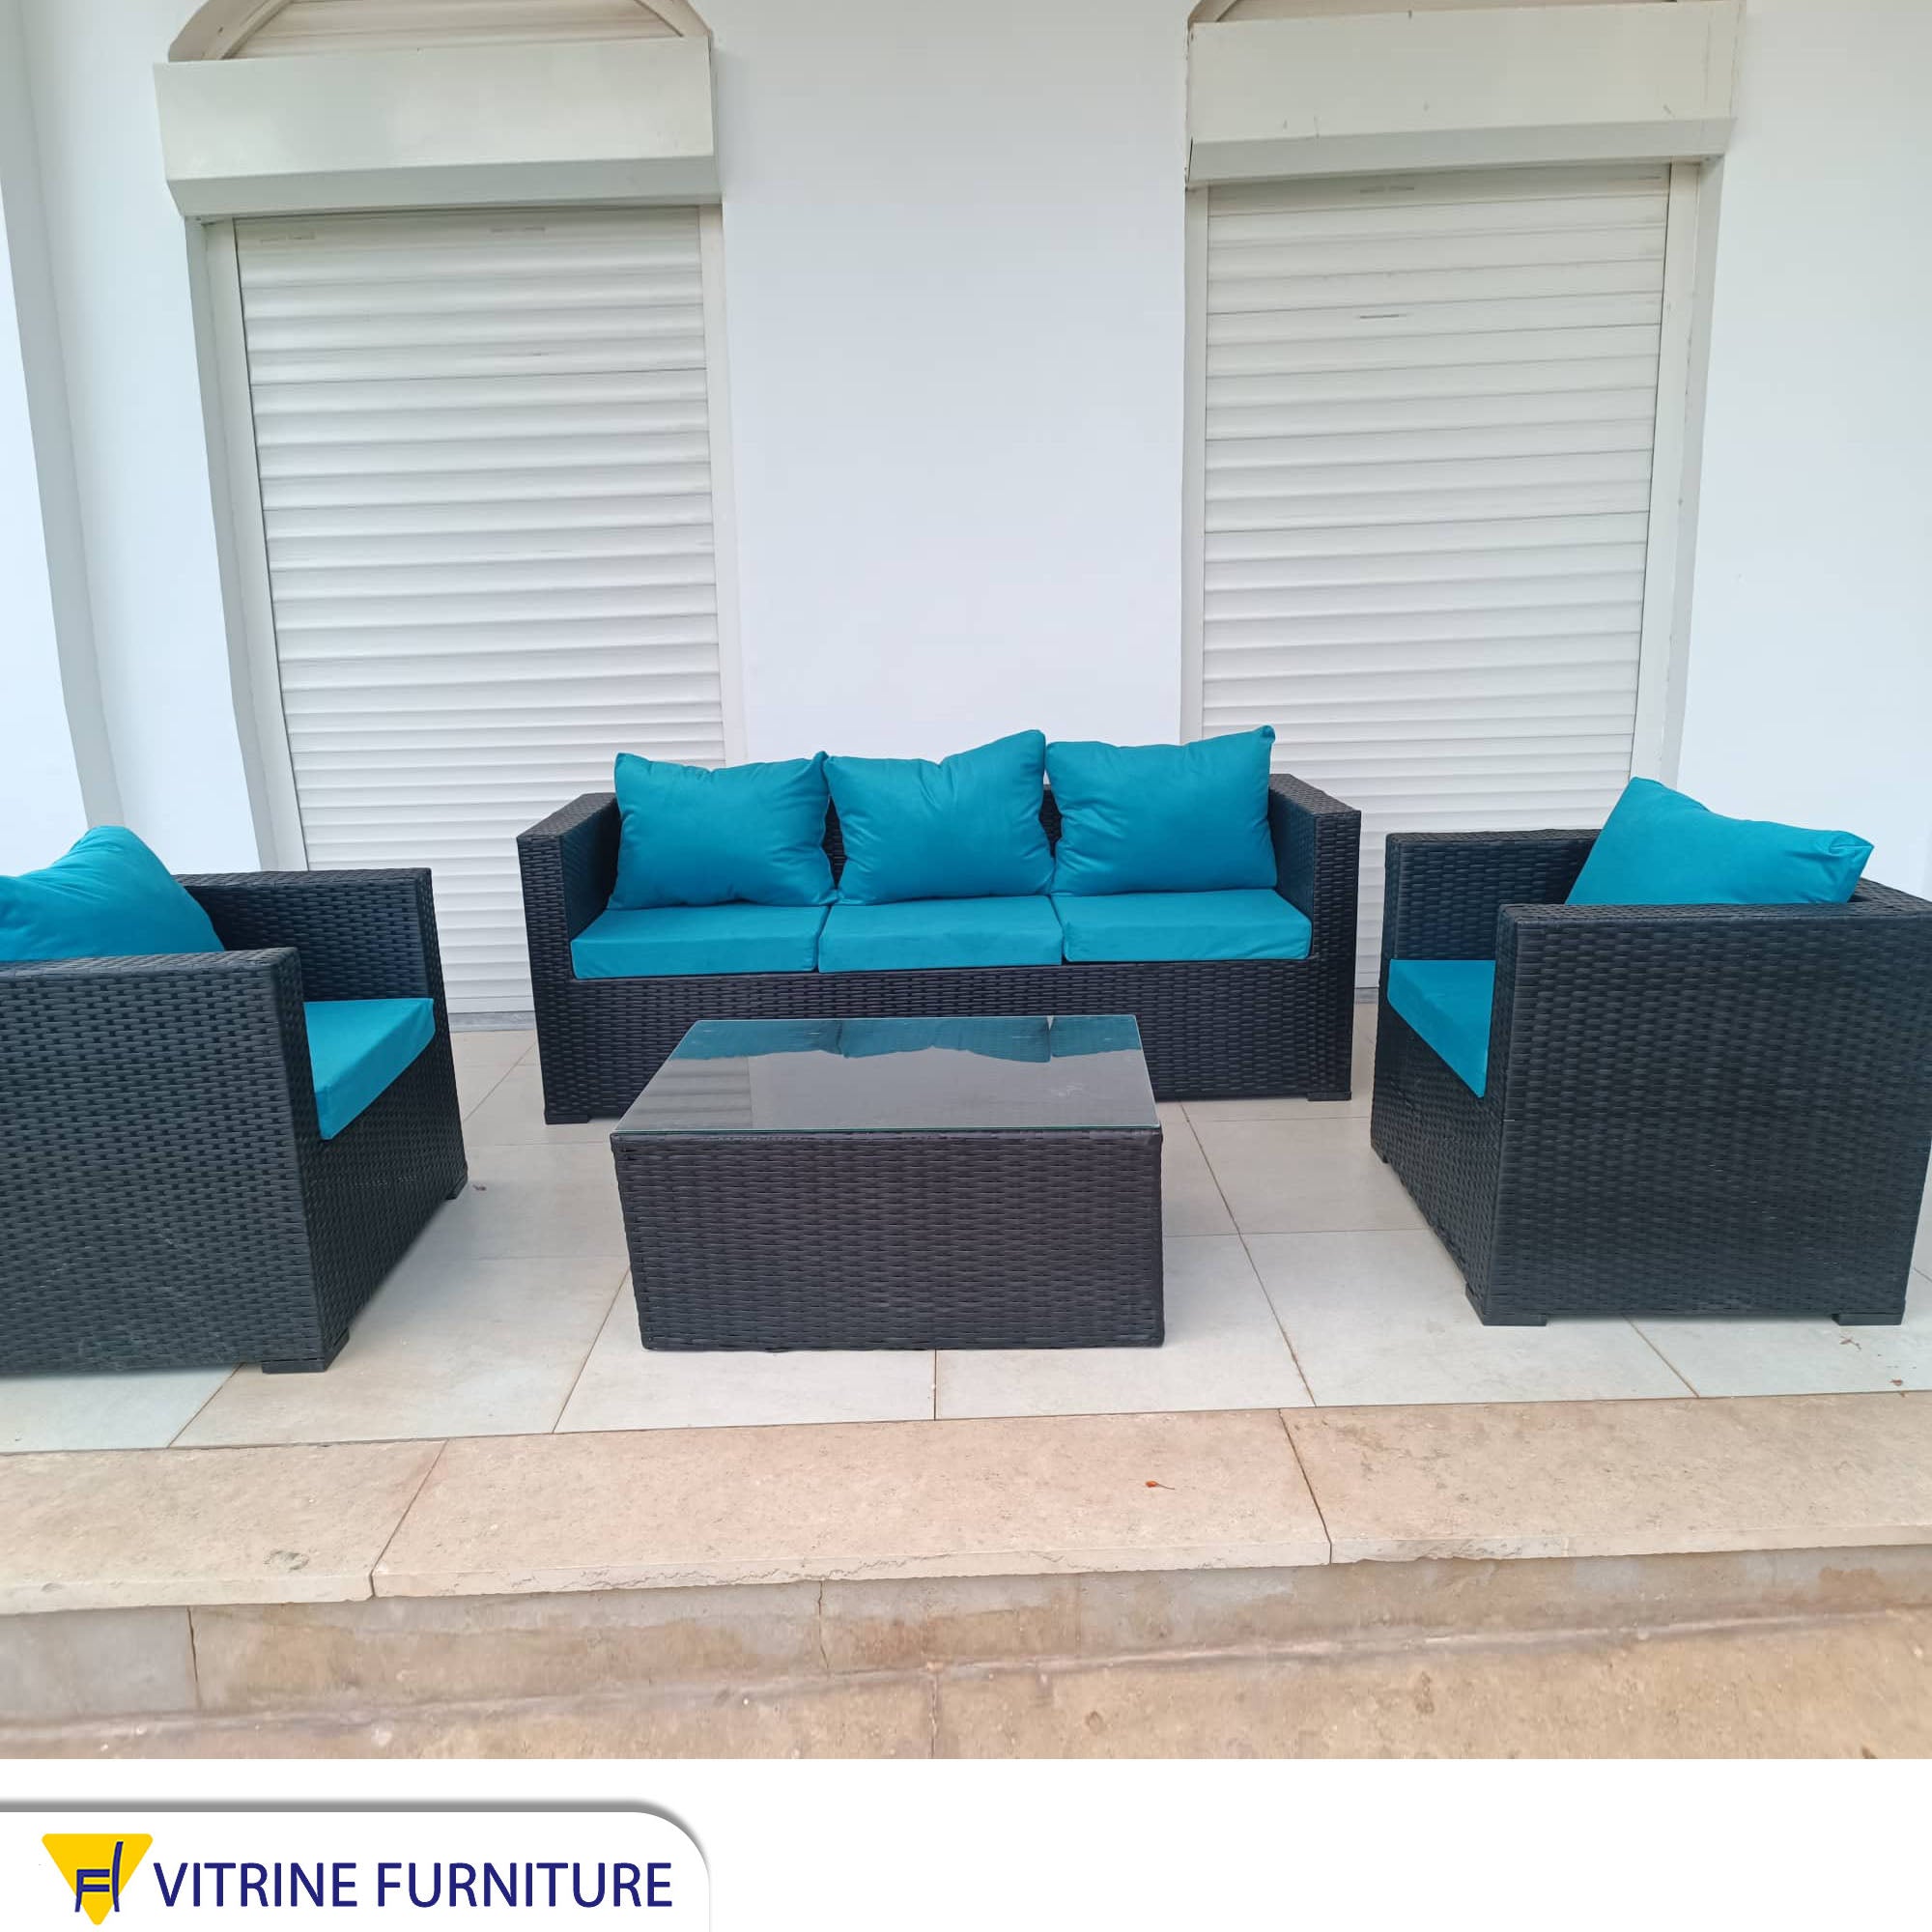 Outdoor seating set with square table